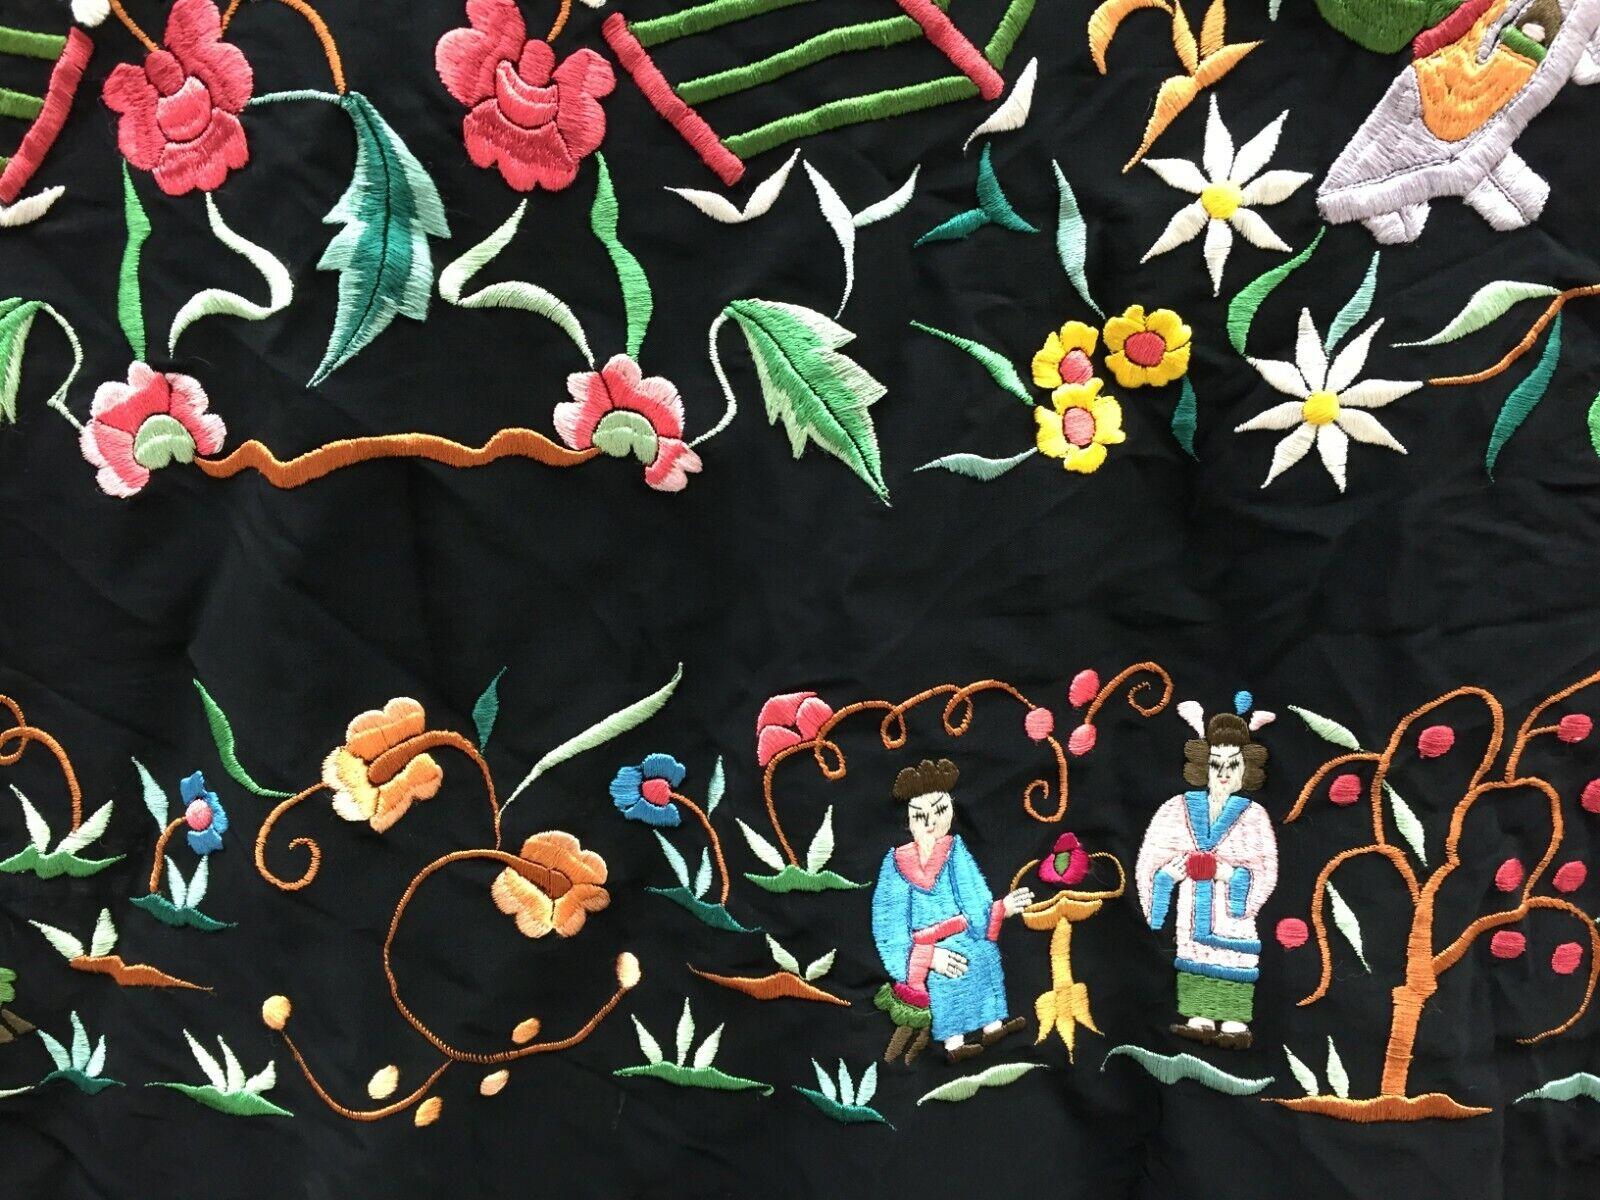 Handmade Vintage Chinese Silk Shawl 5.7' x 5.7', 1950s - 1W04 For Sale 2